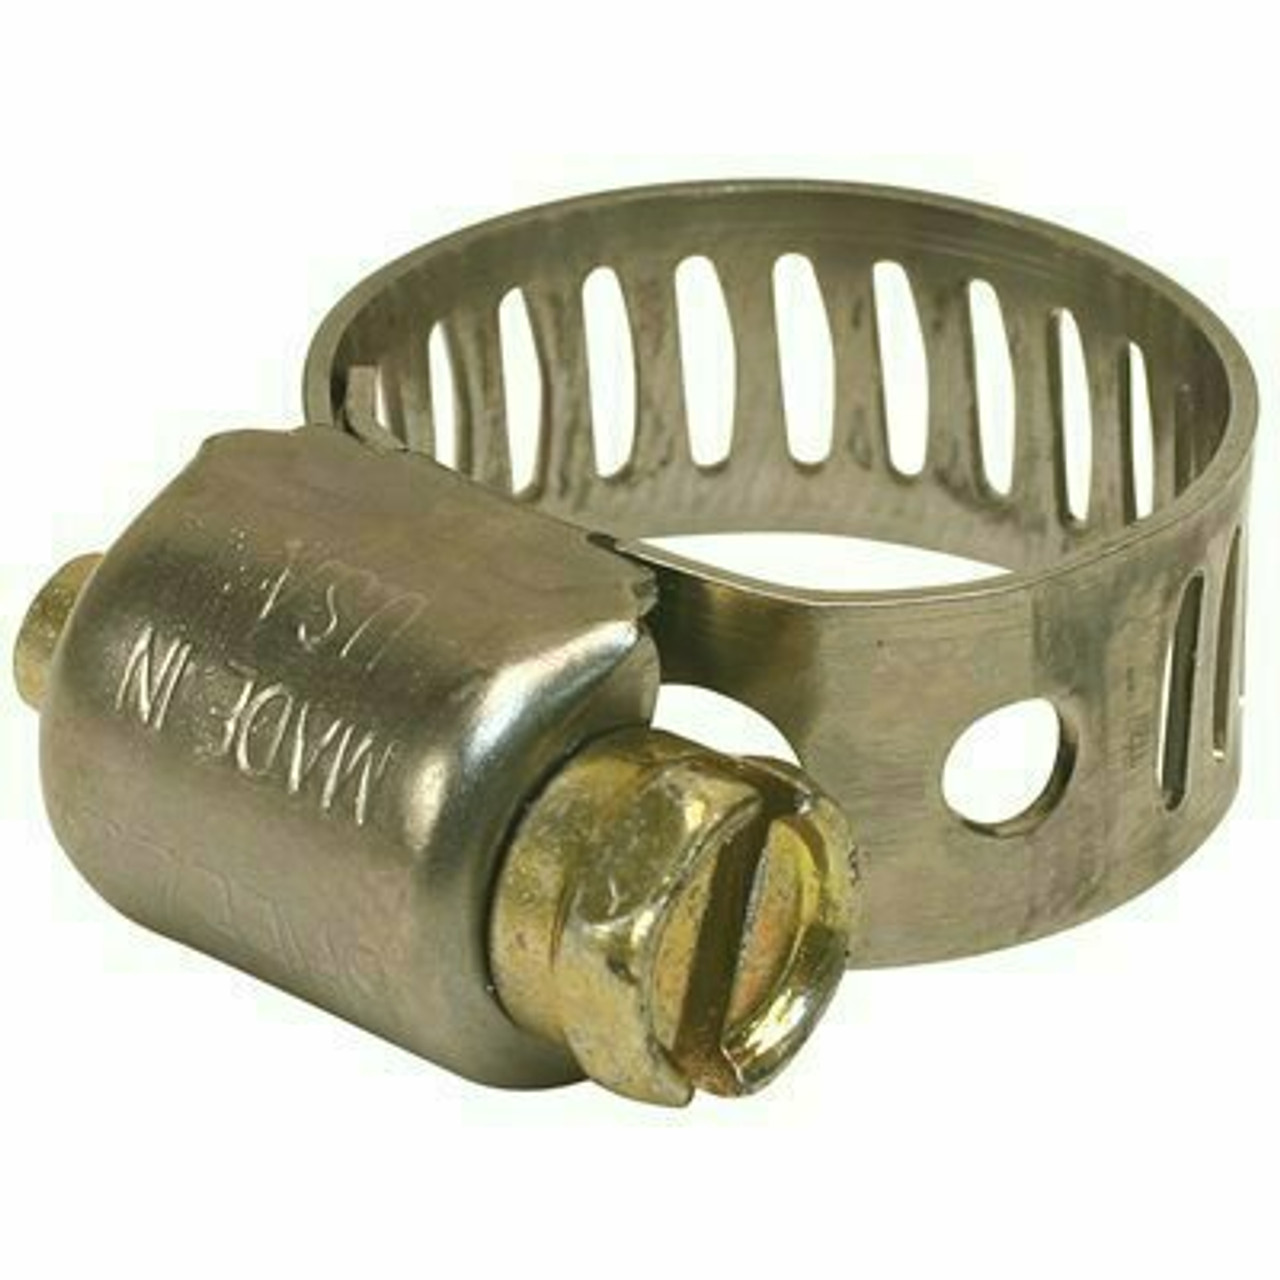 Breeze Clamp Hose Clamp 2-9/16 In. To 3-1/2 In.